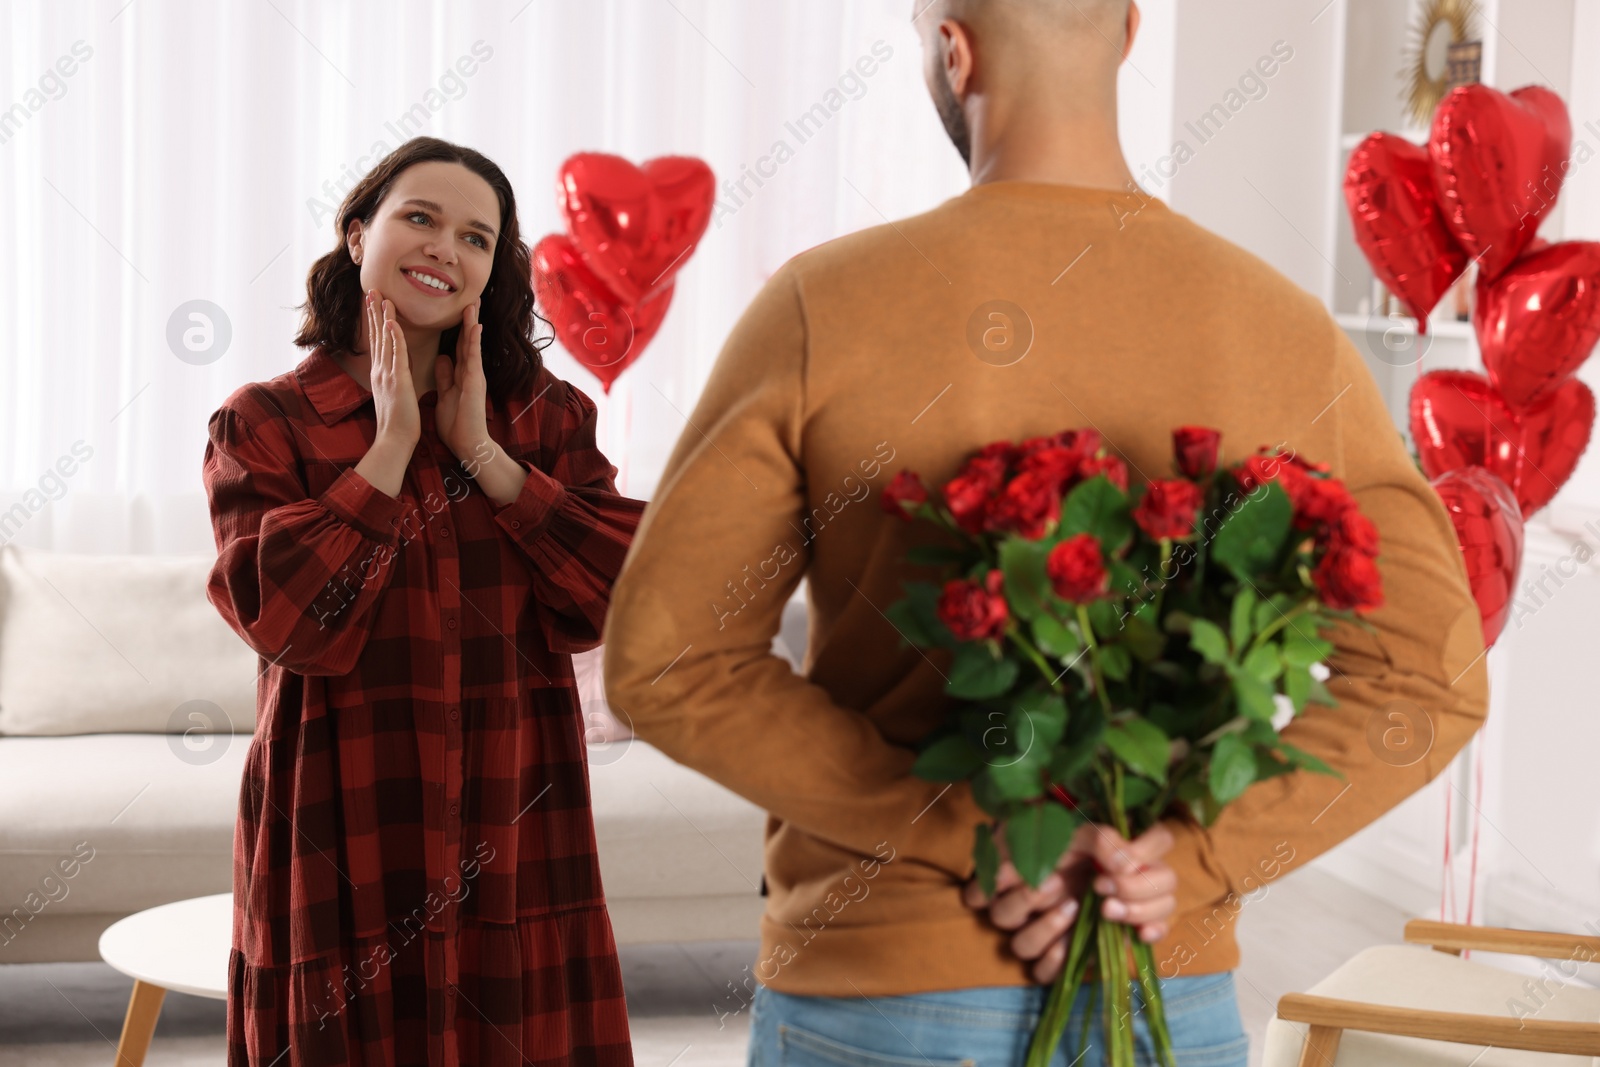 Photo of Man hiding bouquet of red roses for his beloved woman at home. Valentine's day celebration